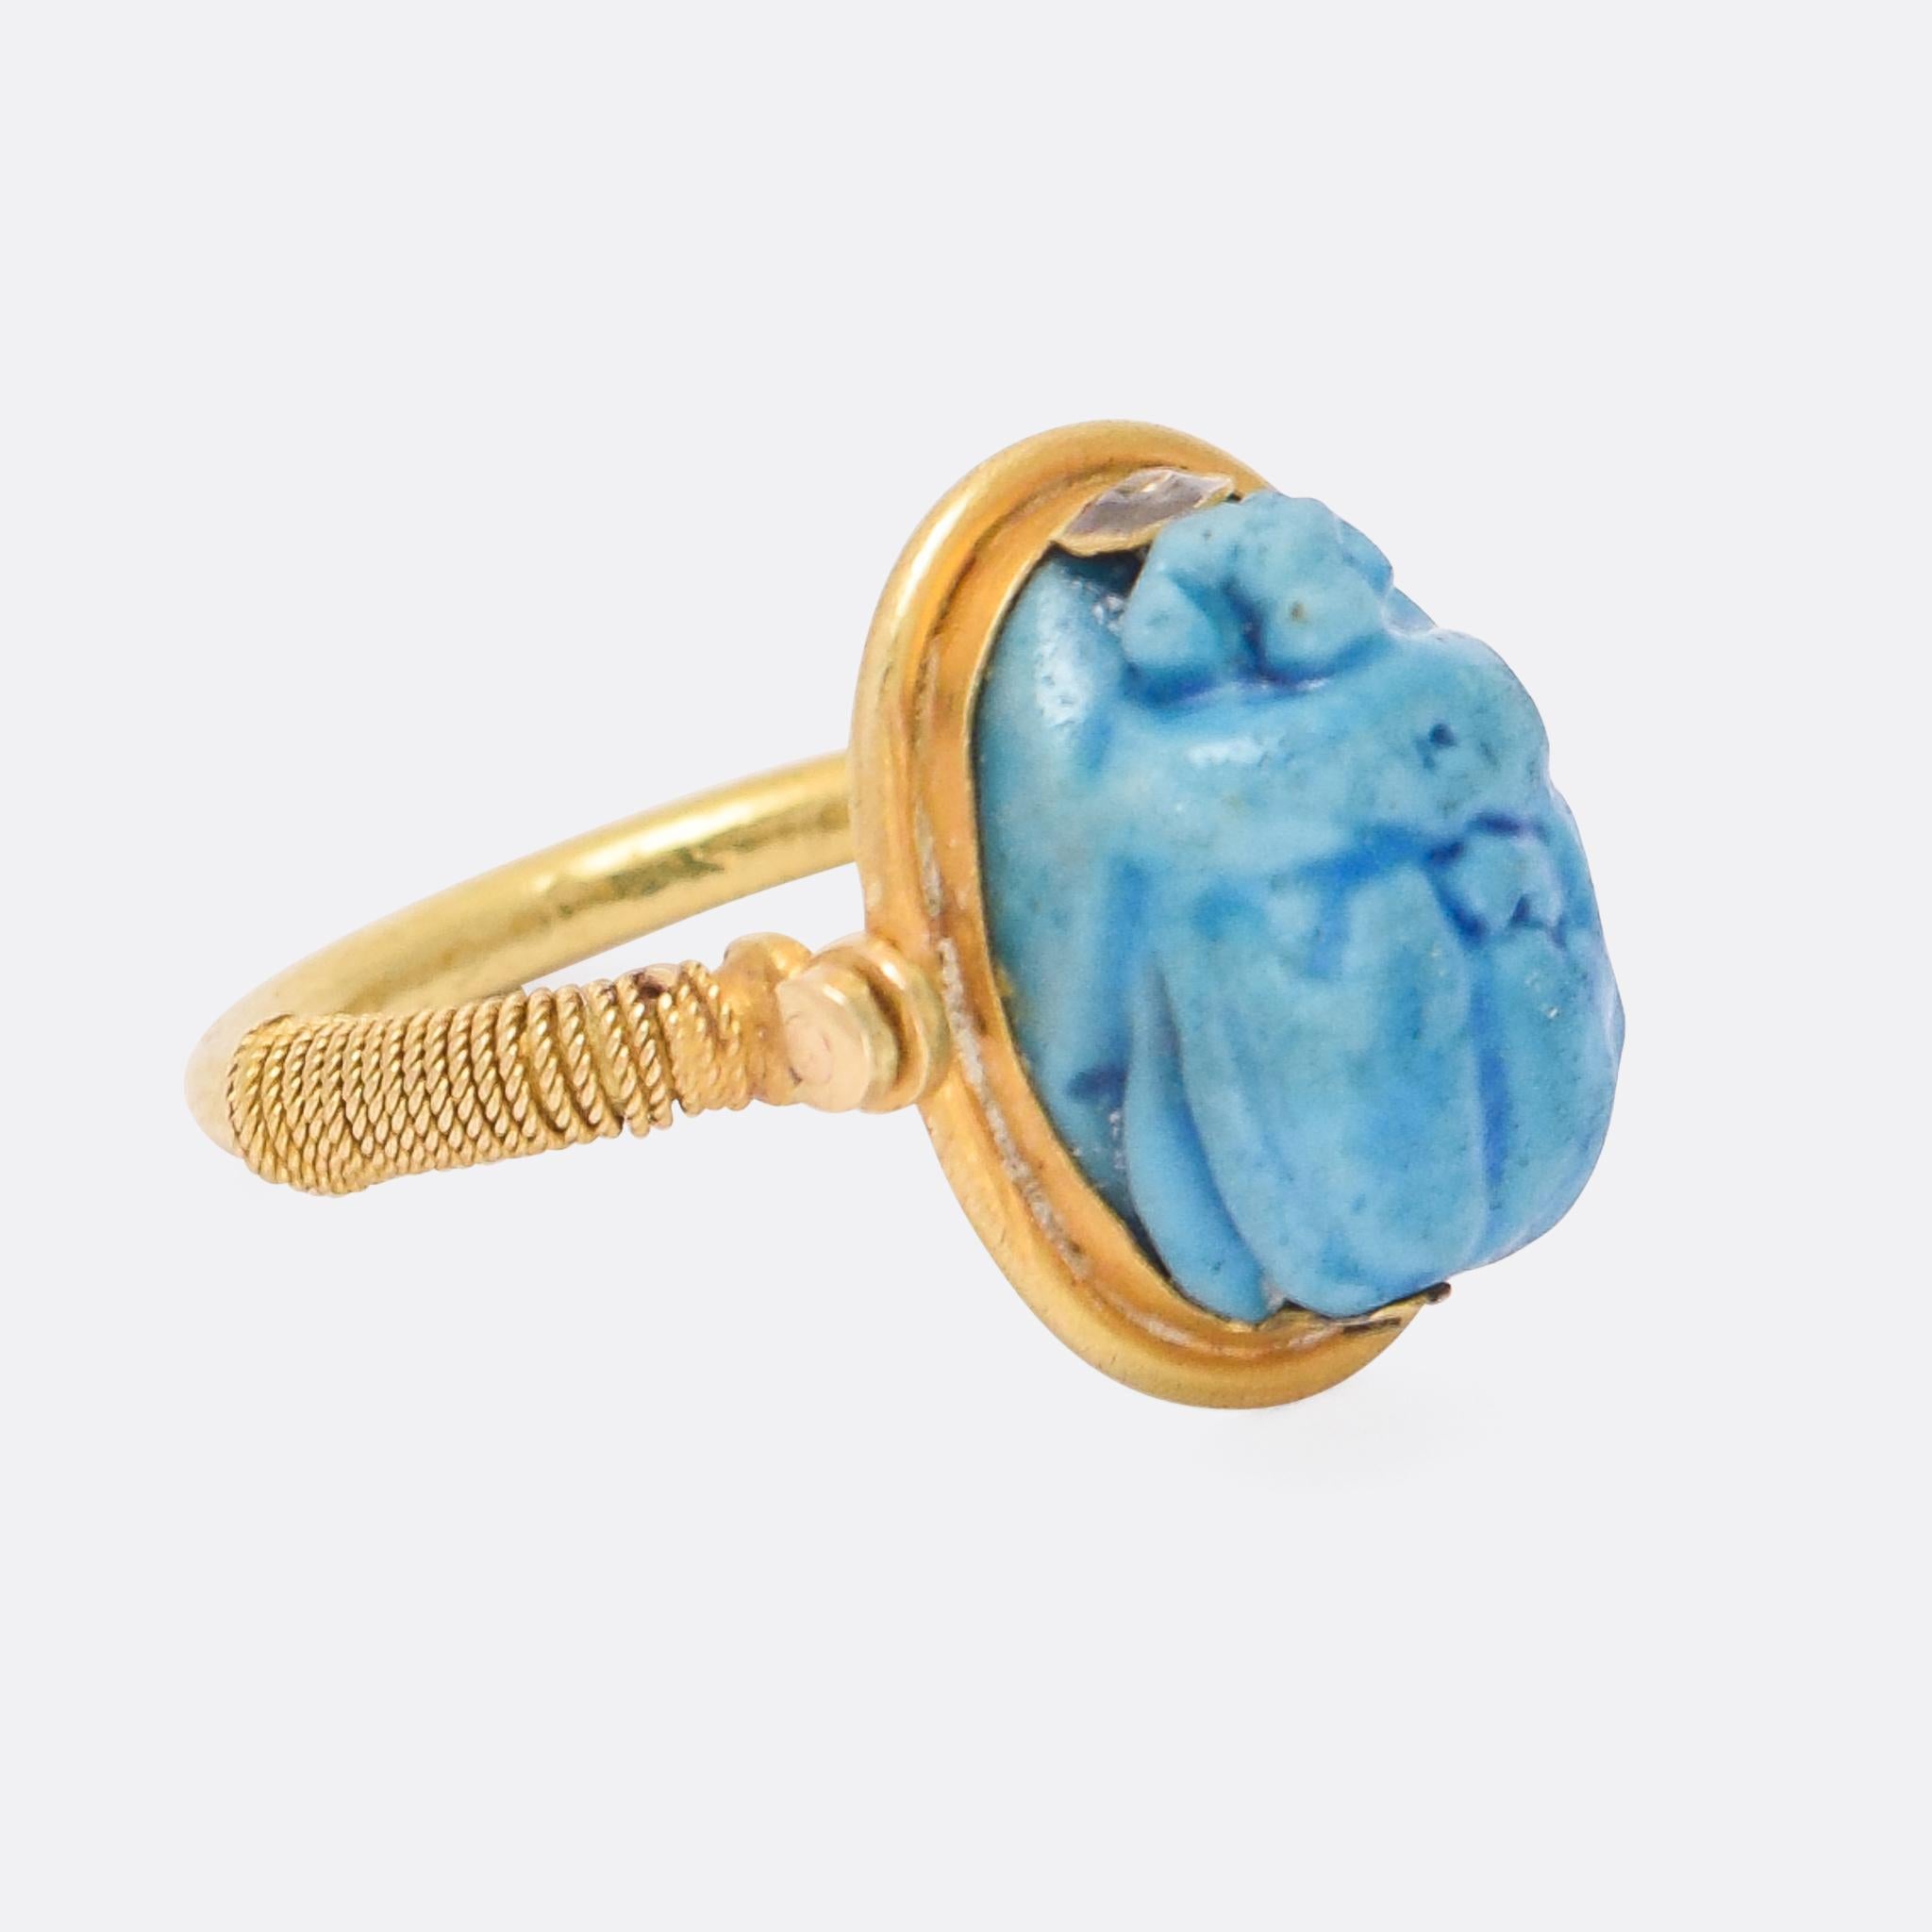 A cool antique Egyptian Revival scarab spinner ring dating from the 1870s. The scarab is a vivid blue colour, and formed from faience. It's set in 15k gold, with rope-work detail to the shoulders.

The term faience broadly encompassed finely glazed